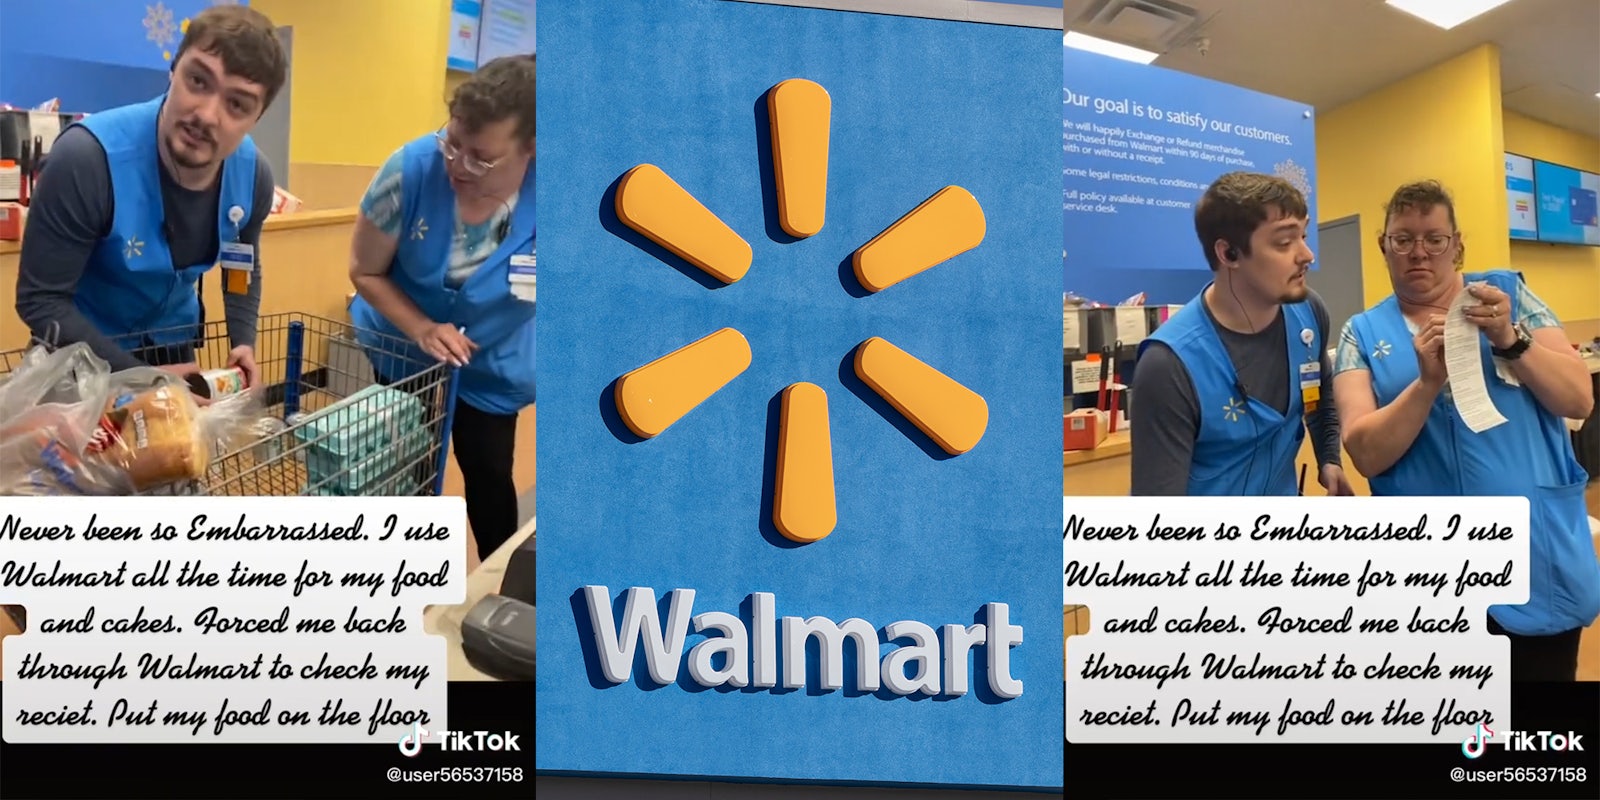 walmart workers removing items from cart (l) walmart logo (c) walmart workers looking at receipt (r) with caption 'never been so embarrassed. I use walmart all the time for my food and cakes. Forced me back through walmart to check my reciet. put my food on the floor'